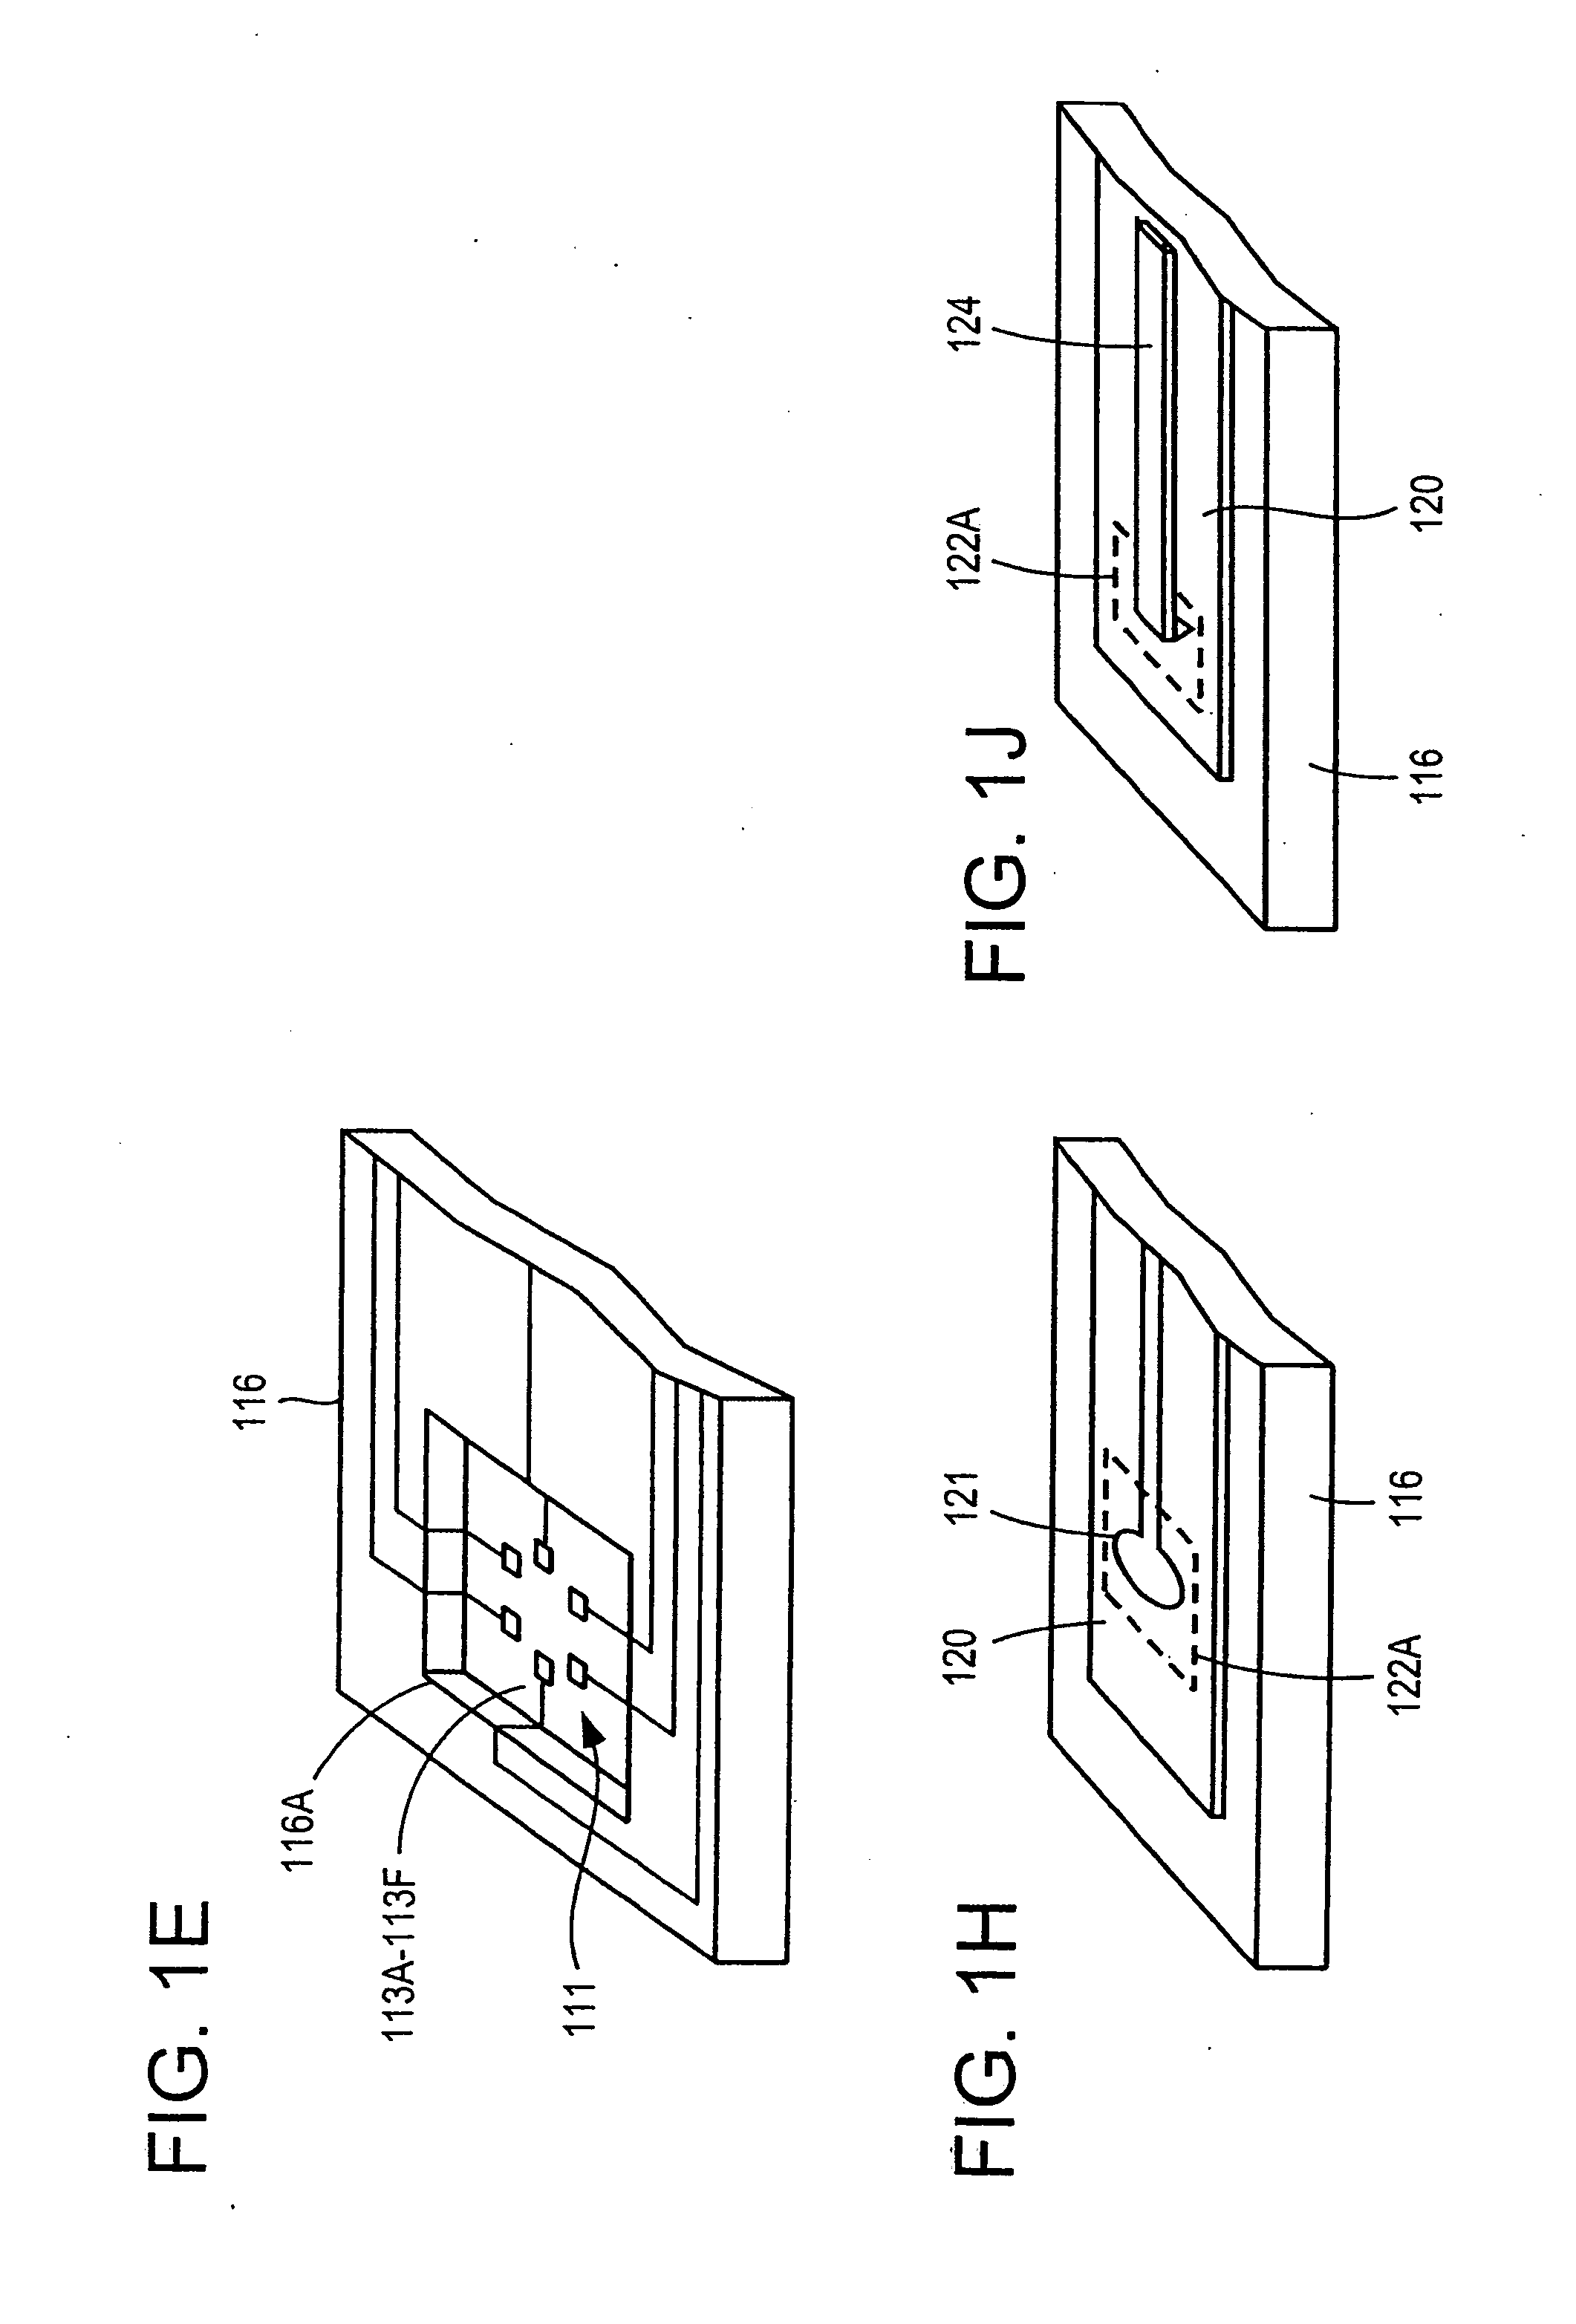 System and methods for fluid quality sensing, data sharing and data visualization